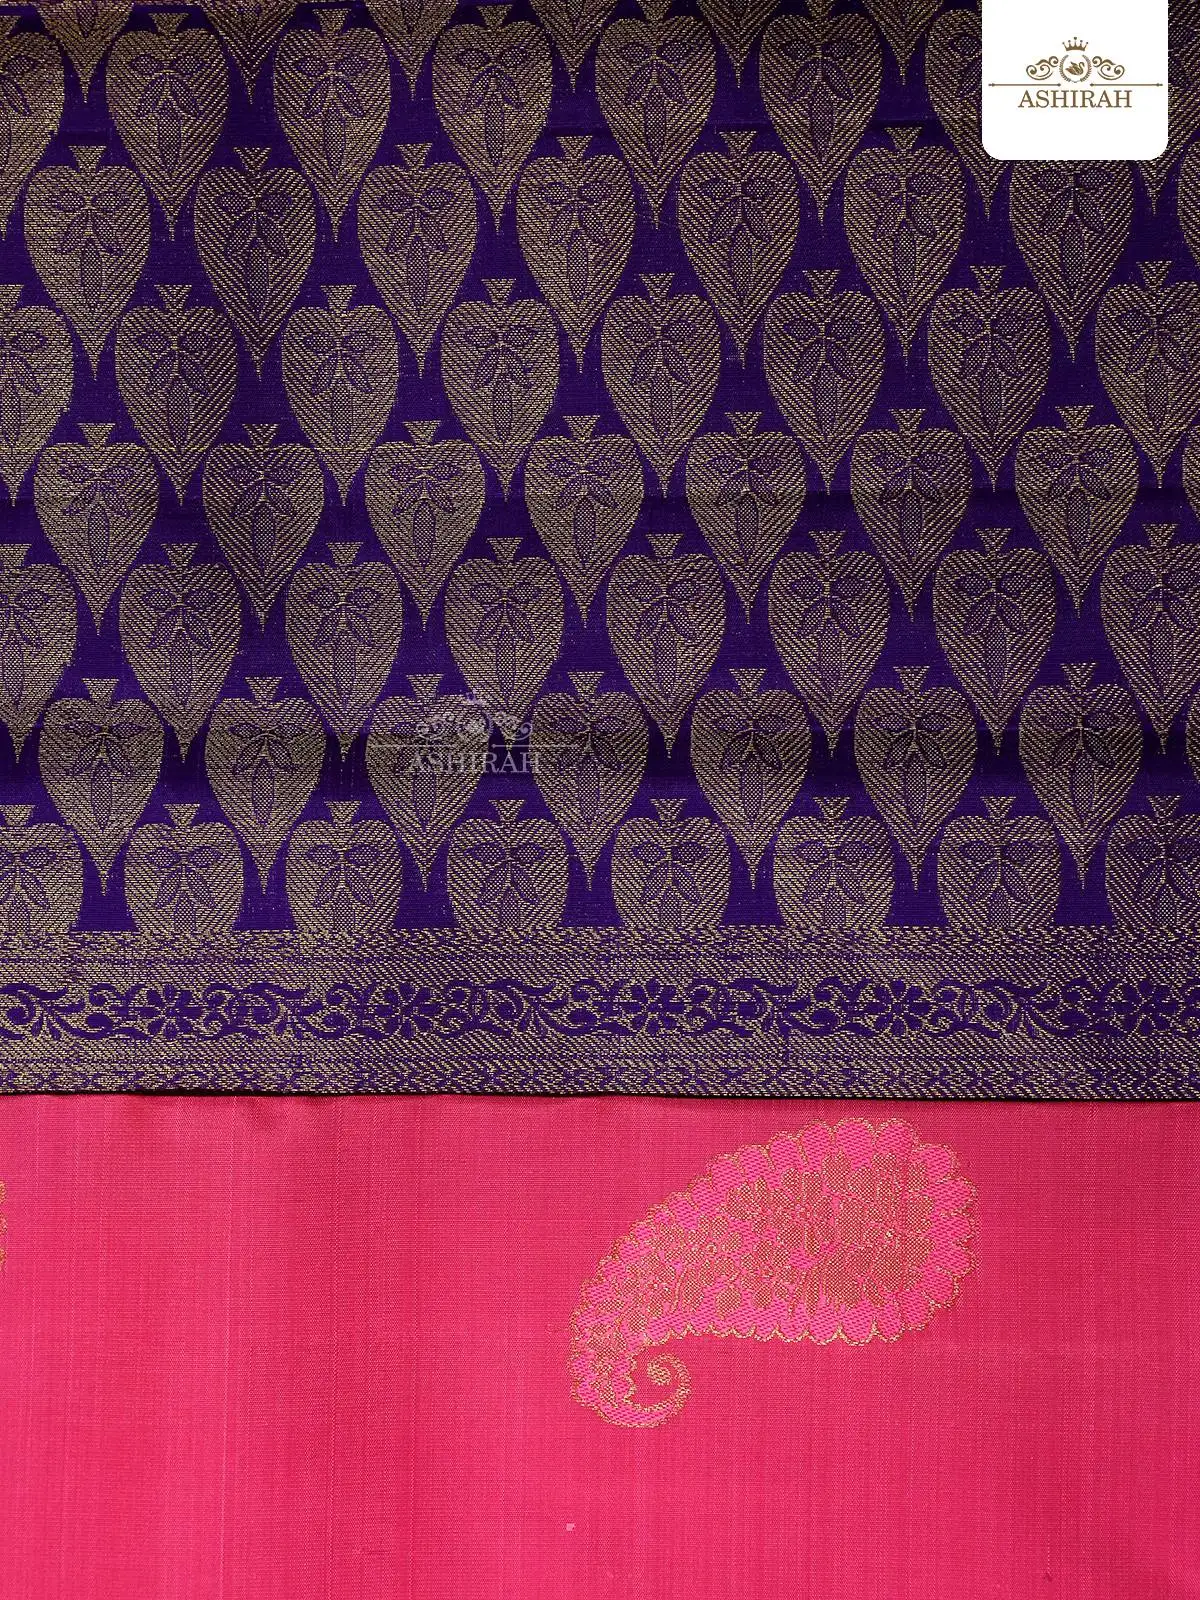 Pink Pure Kanchipuram Silk Saree With Paisley Motifs On The Body And Without Border